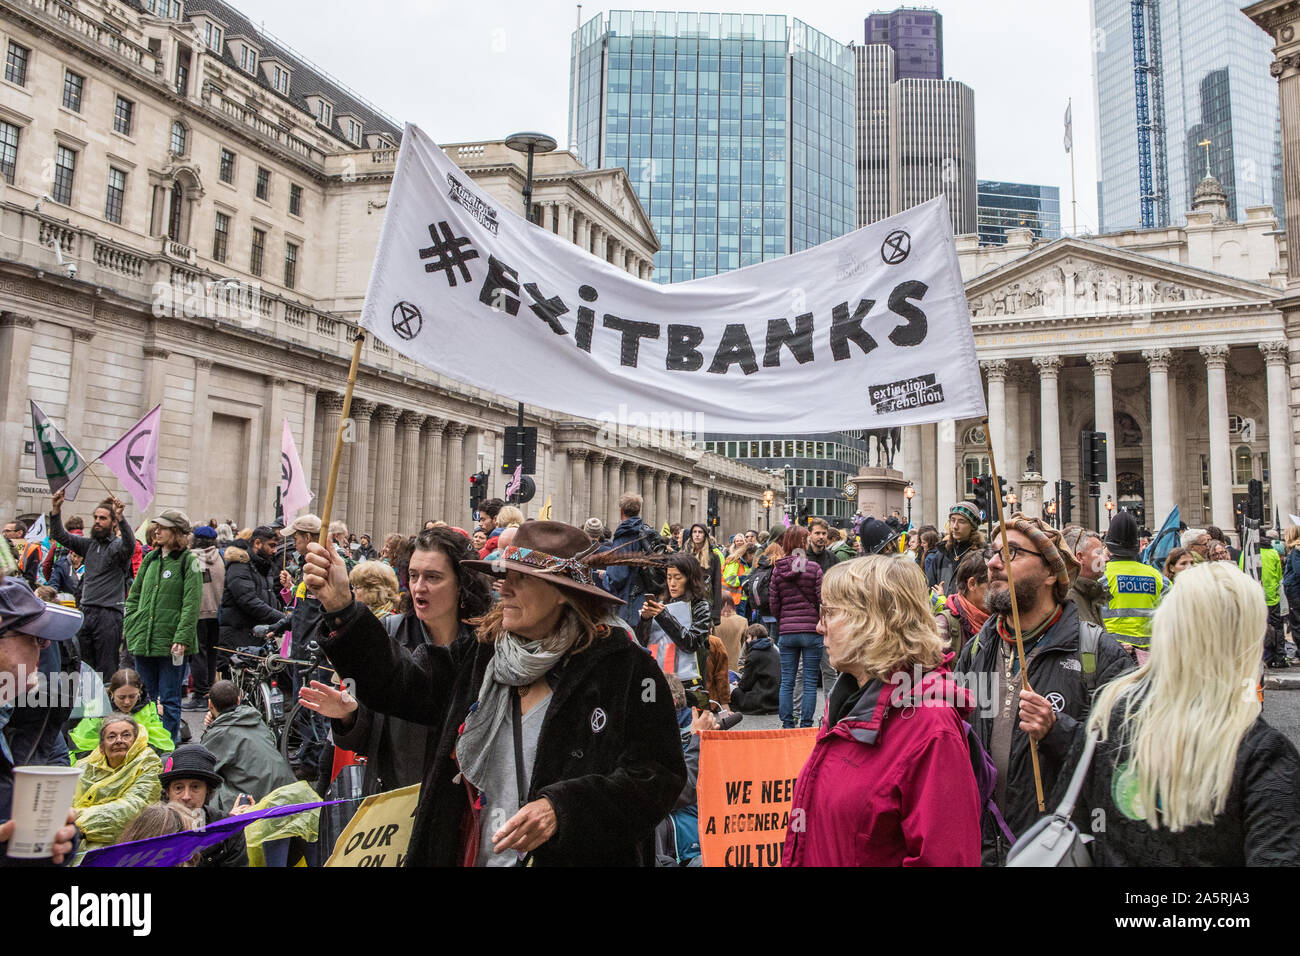 Extinction Rebellion Climate Change Protests London October 2019 Stock Photo